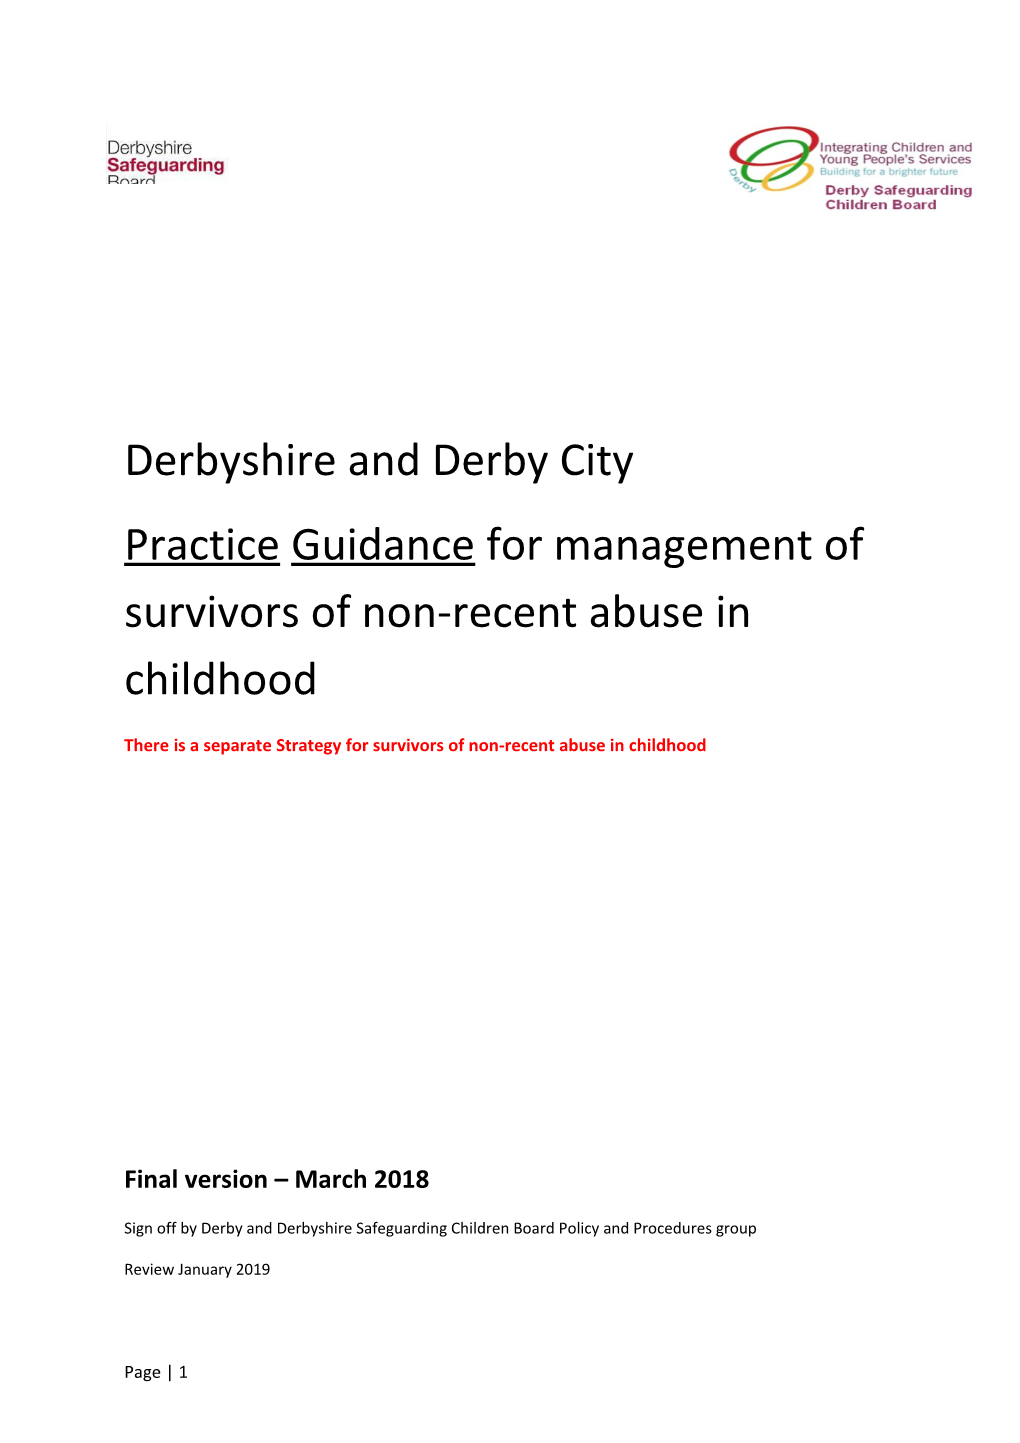 Derbyshire and Derby City